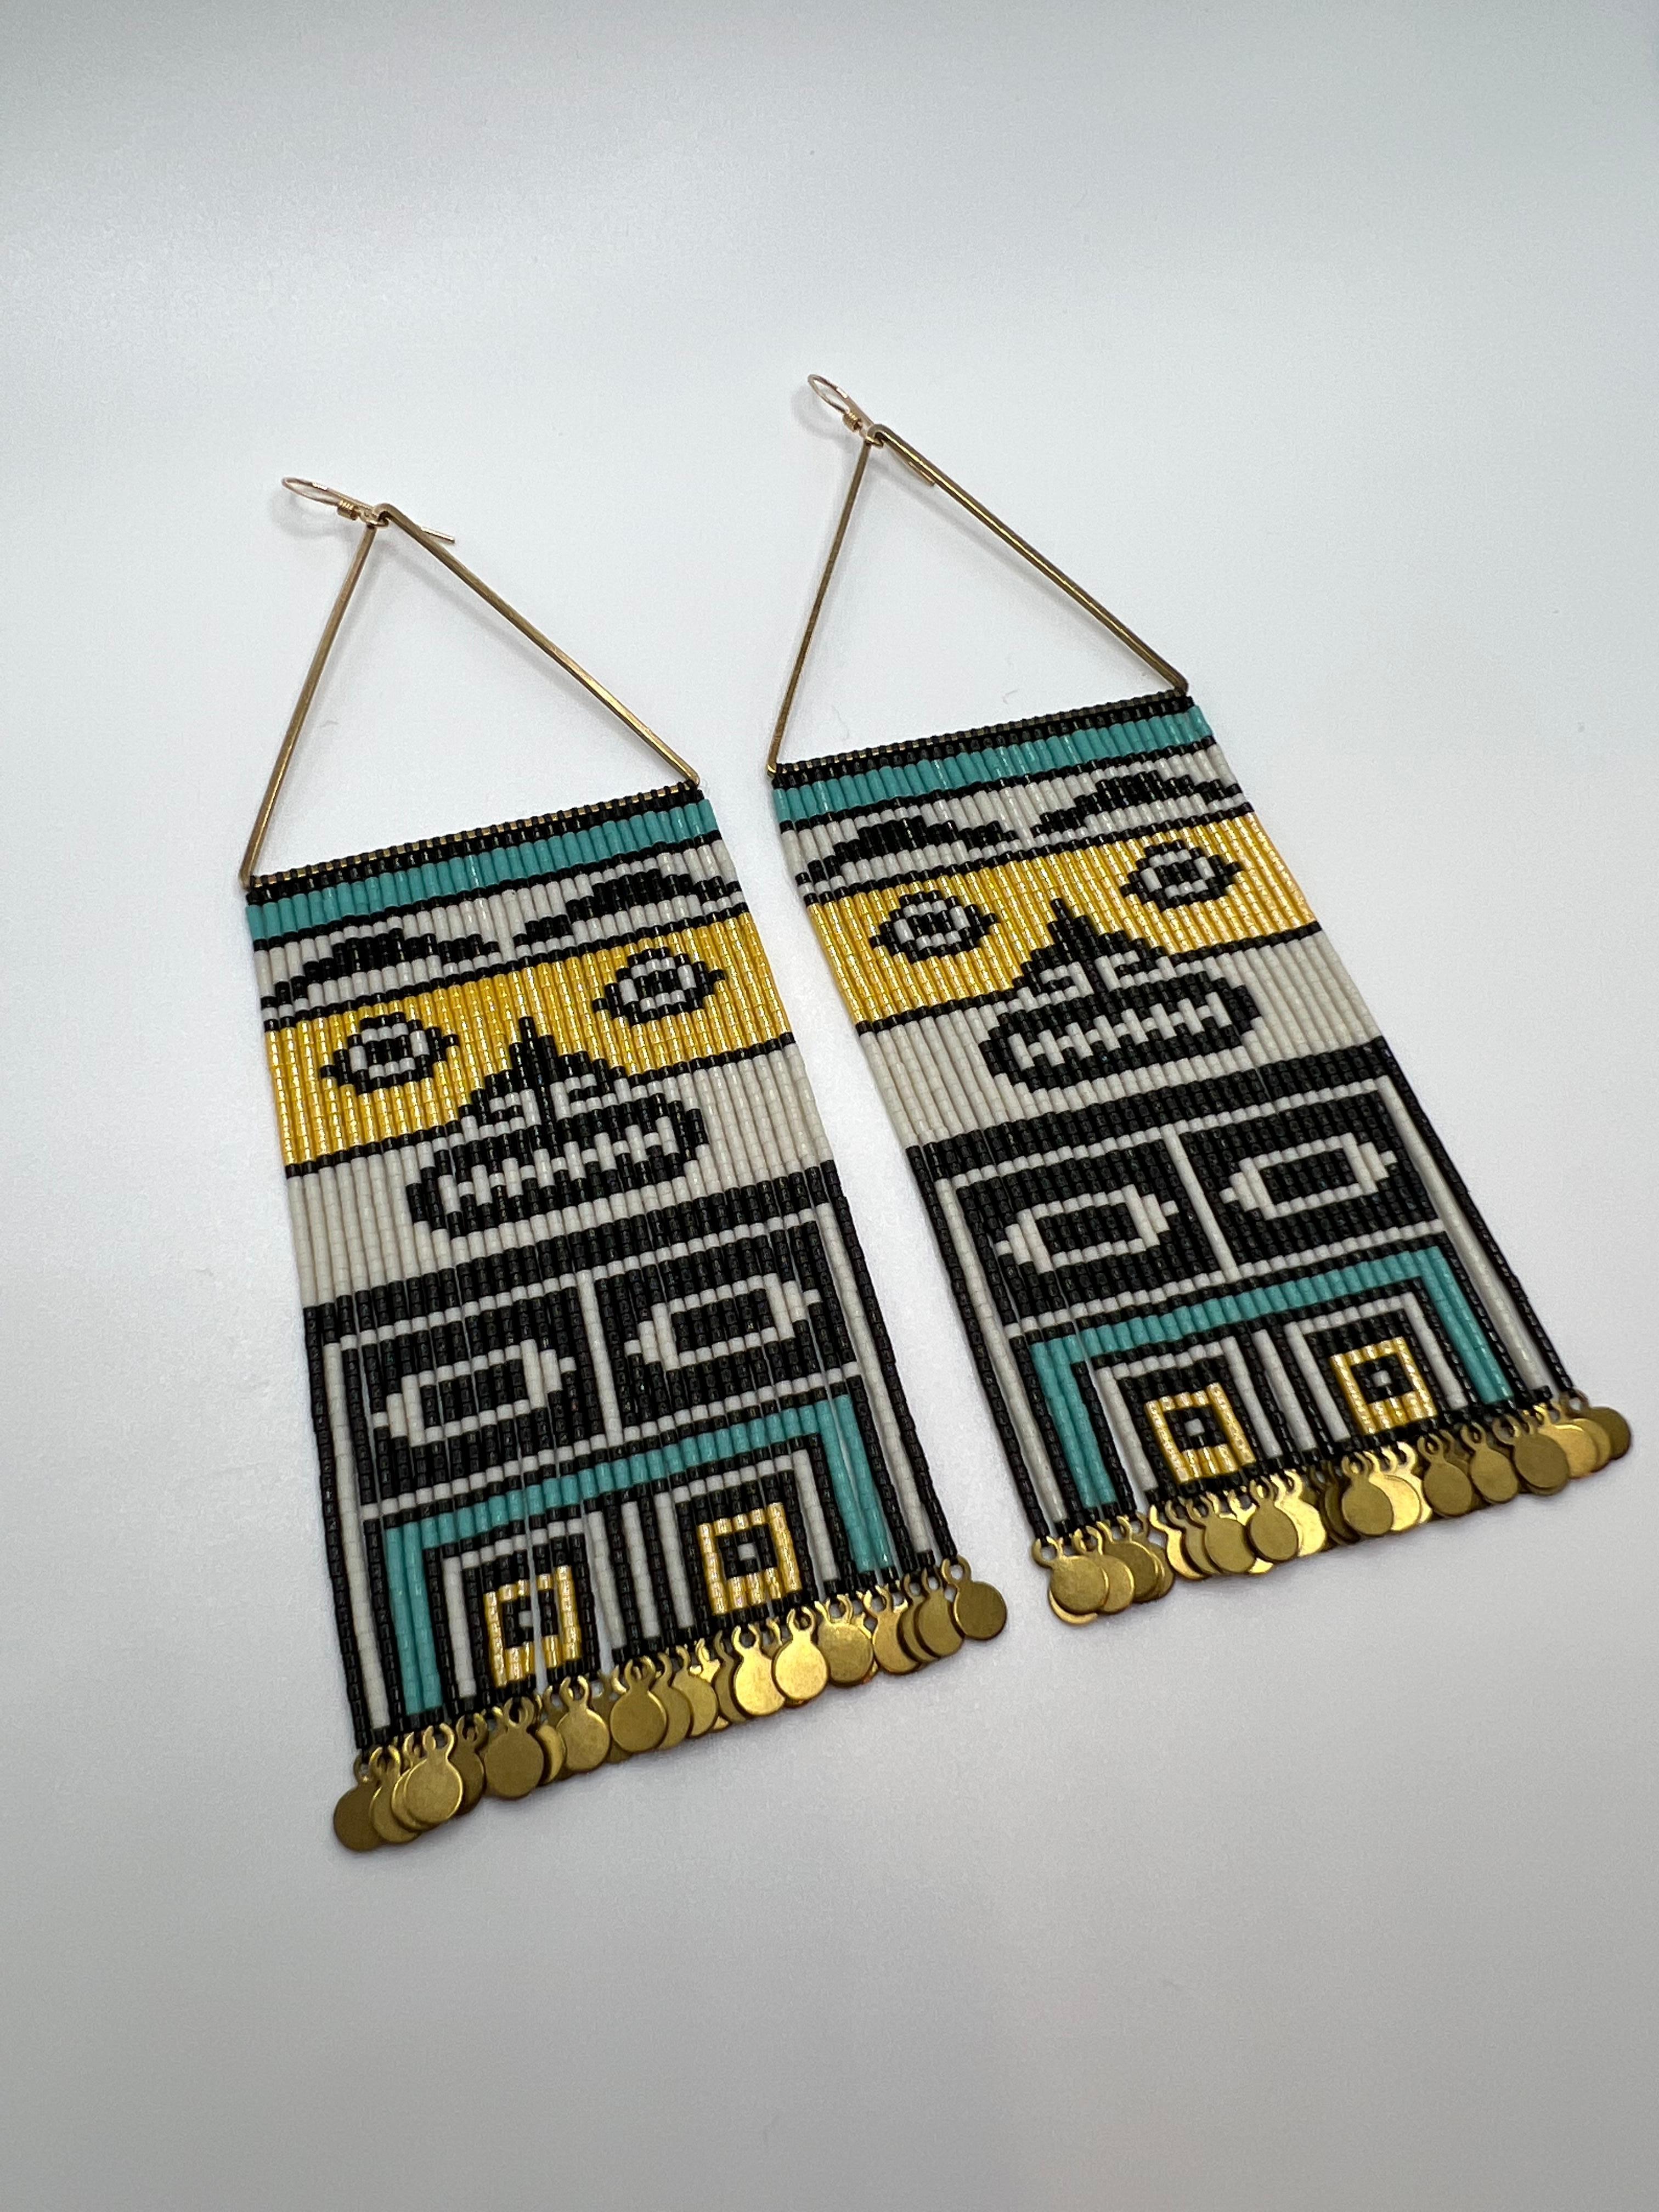 These earrings are based on the Naaxiin or Chilkat style of weaving of the Northwest coast. This art is so complex and has so much history and power, it deserves to be held in high esteem and to be known and celebrated. 